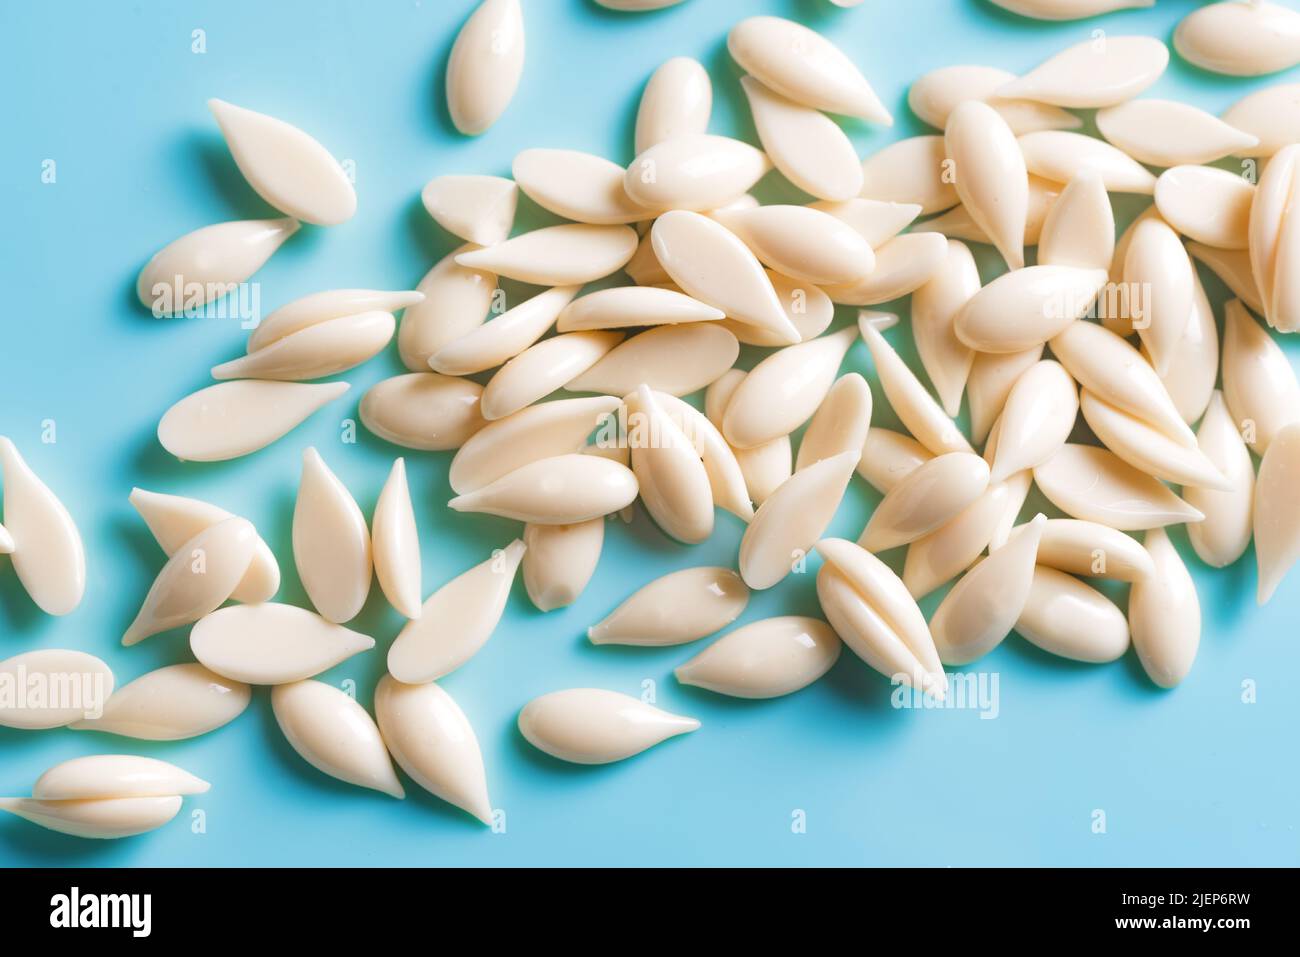 Natural depilatory film wax bean granules on blue background close up. Hair removal, natural beauty concept,  pearl wax. Stock Photo